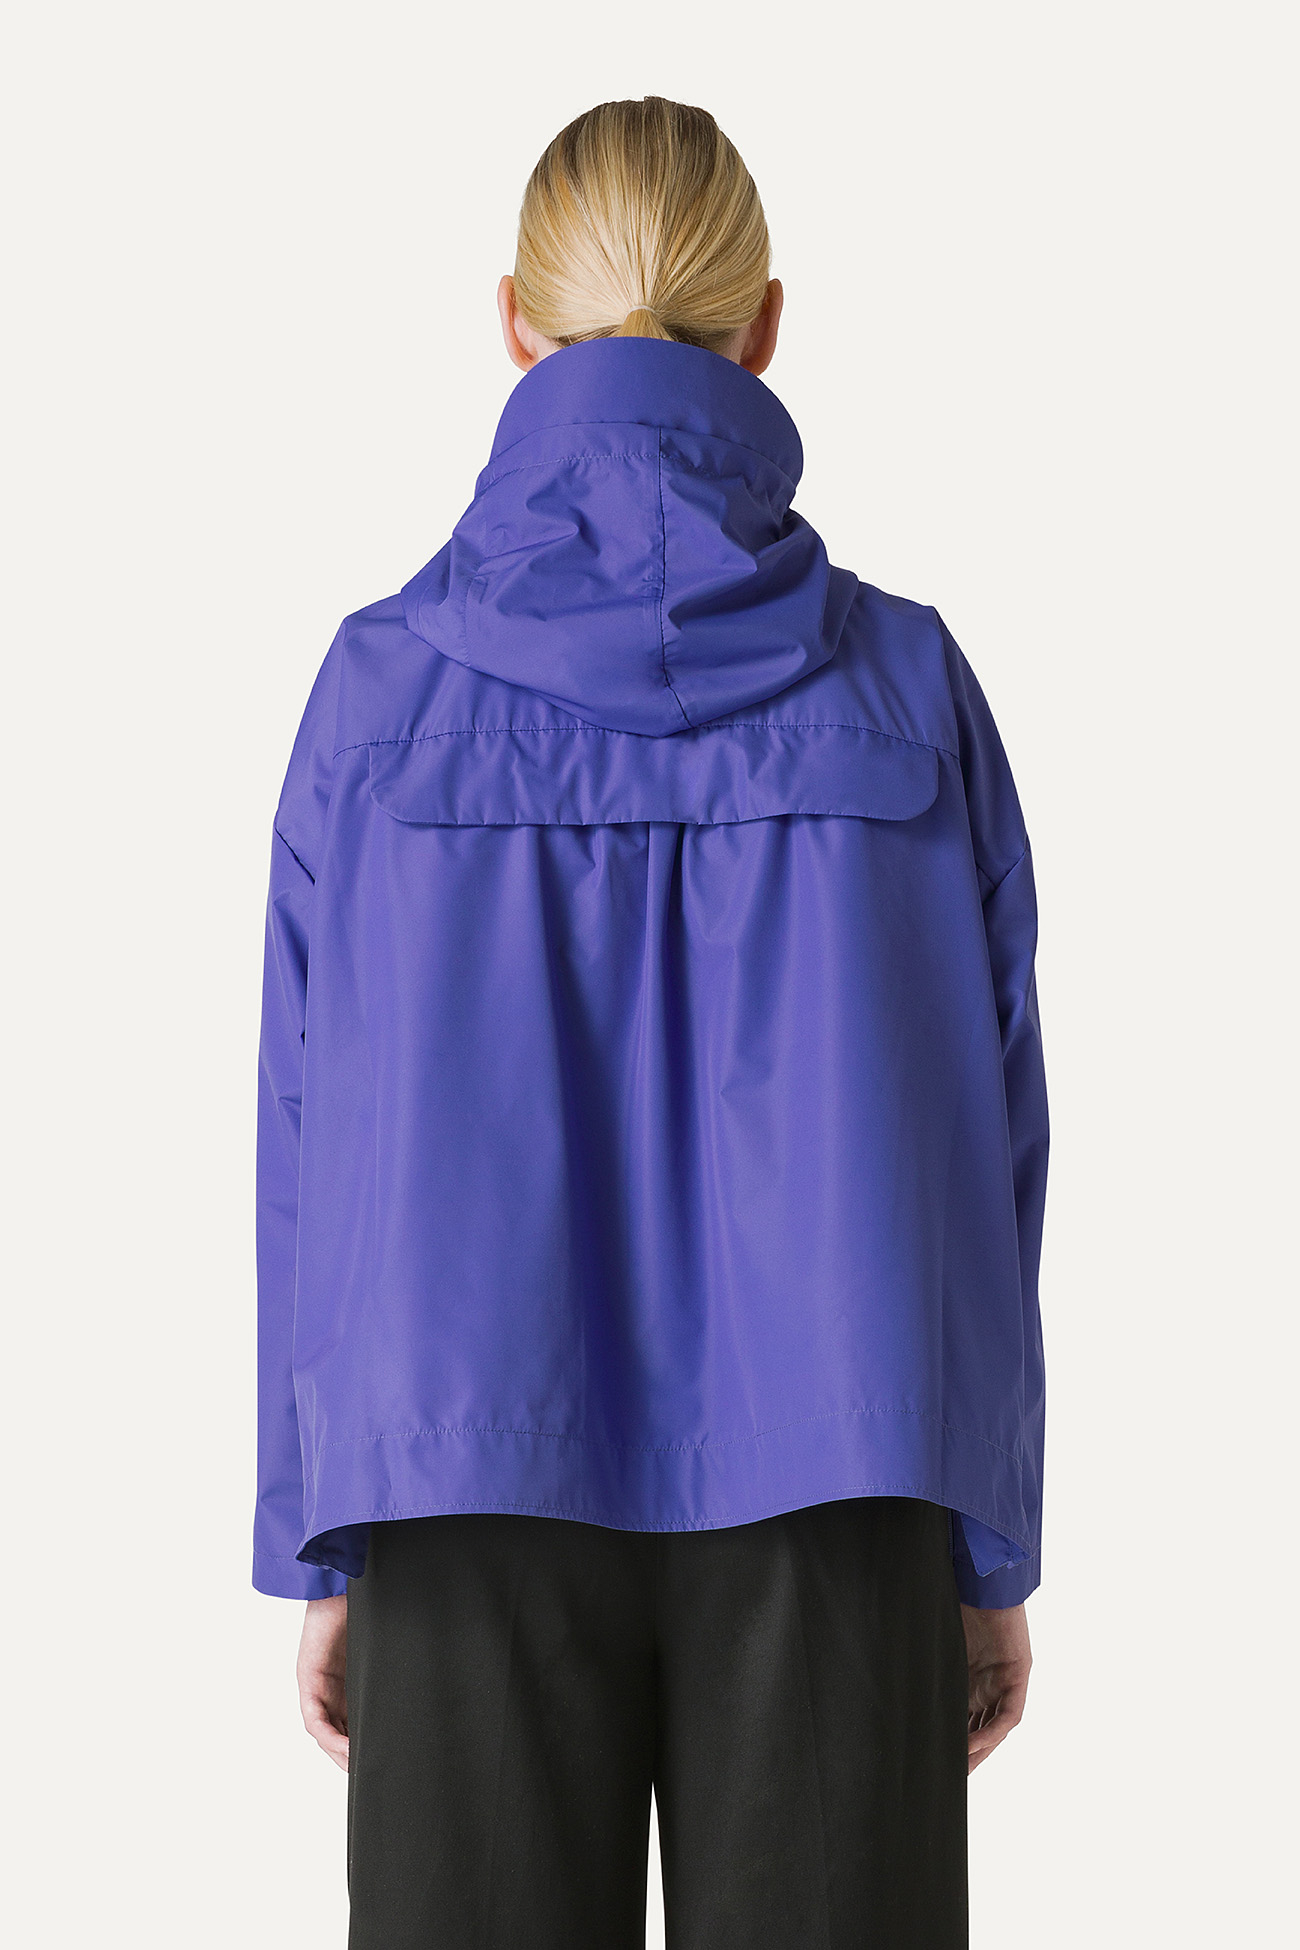 SHORT NYLON JACKET WITH SILVER LINING 9214 - PERIWINKLE - OOF WEAR